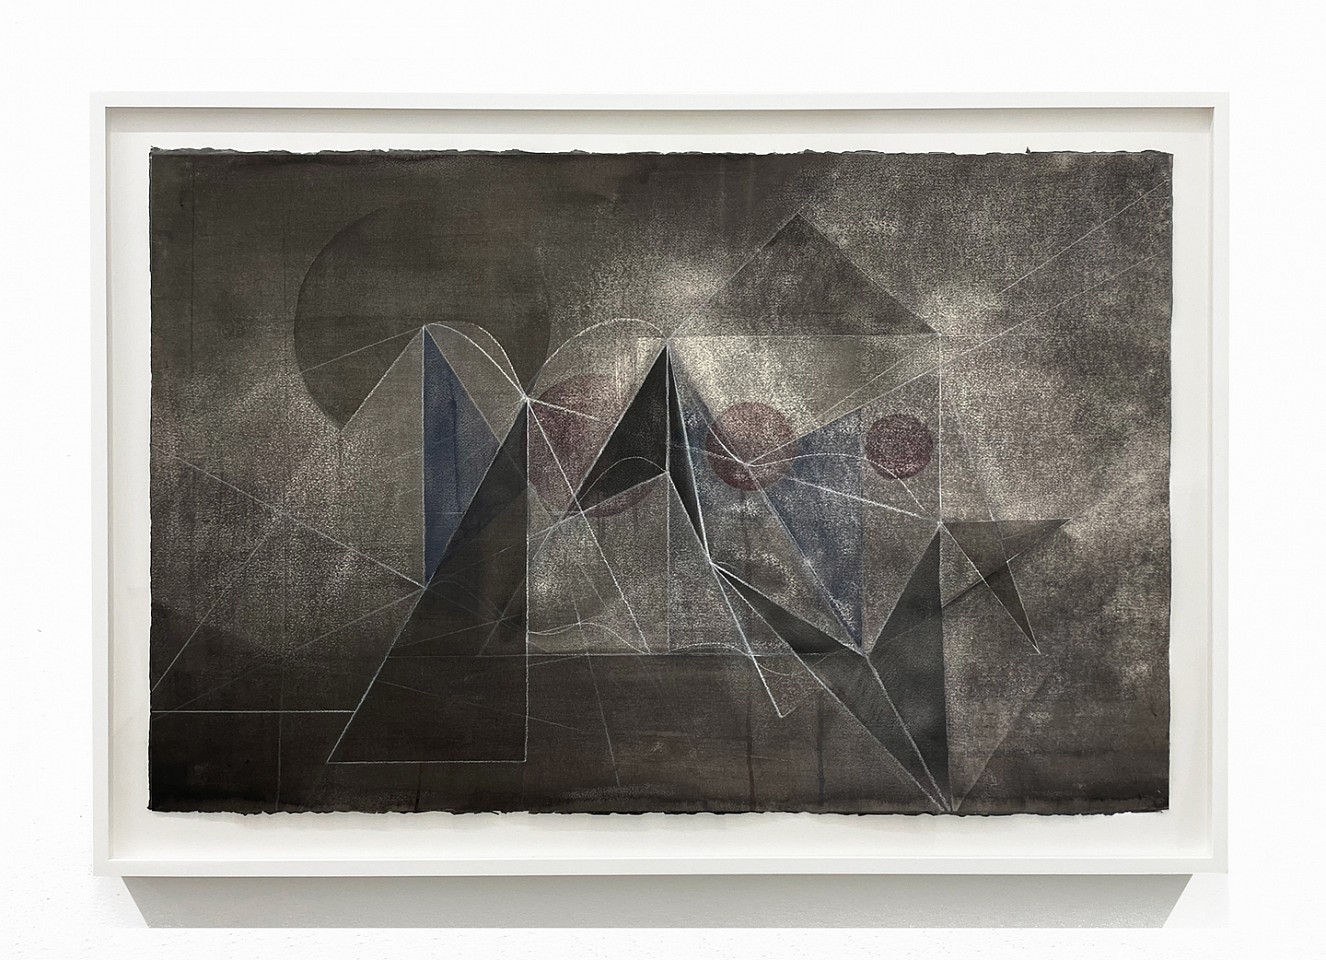 Celia Gerard
Moonlight, 2024
GER178
mixed media on paper, 26 x 40 inches / 31 1/2 x 44 1/2 inches framed